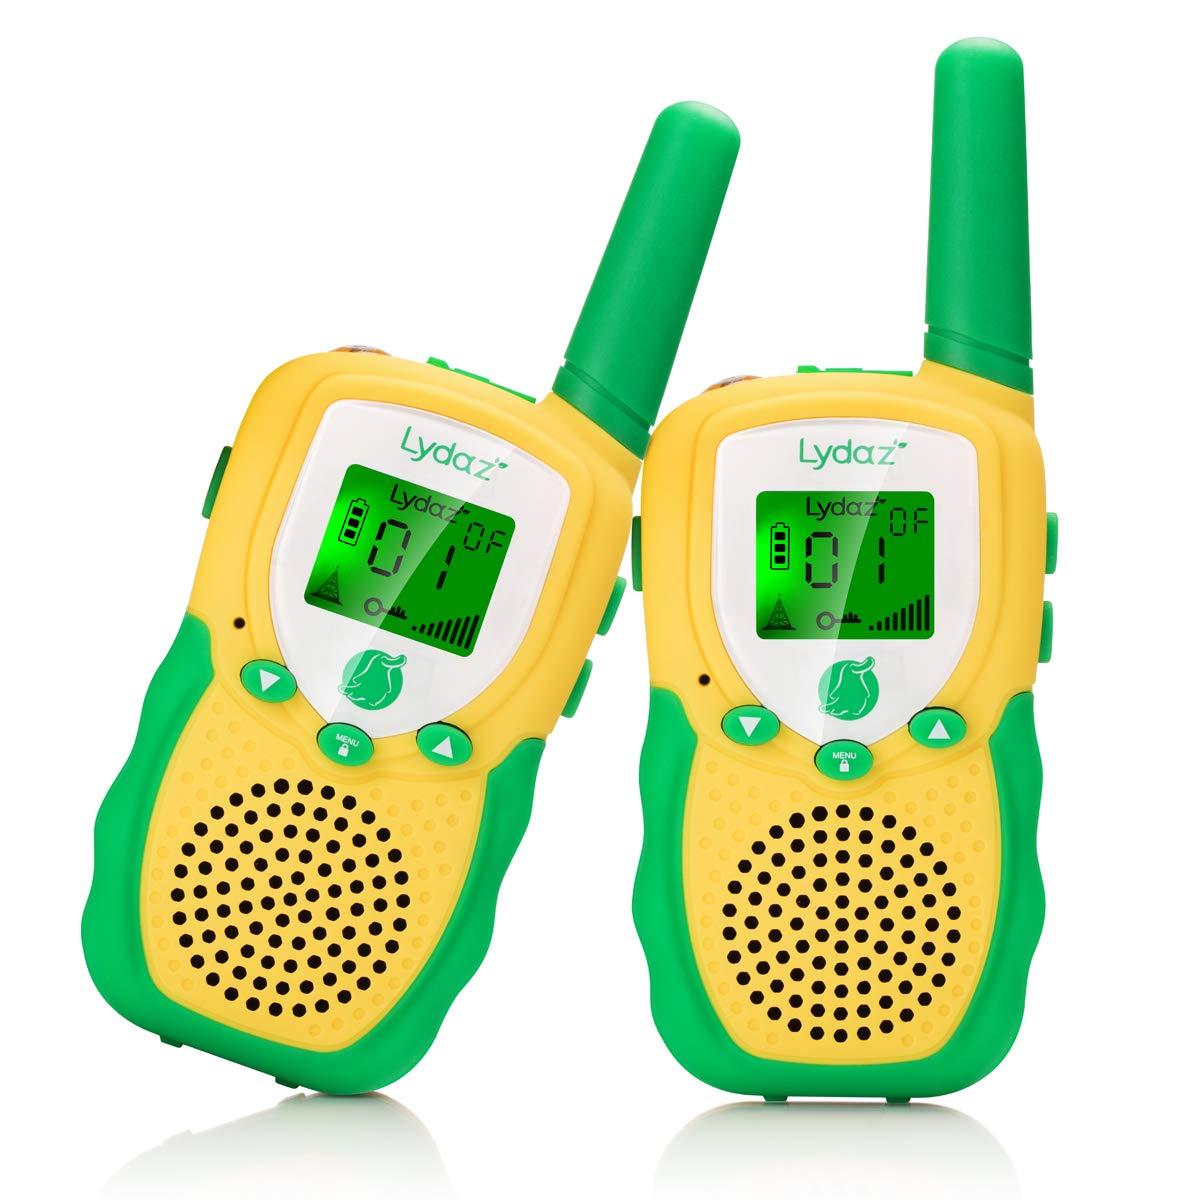 Walkie Talkies for Kids, 22 Channels 2 Way Radios 3 Miles Range Long Distance with 2 Inch Backlit LCD Flashlight - Best Gifts Toys for Kids Boys Girls Age 3 4 5 6 7 8 9 10 Outdoor Adventures Camping